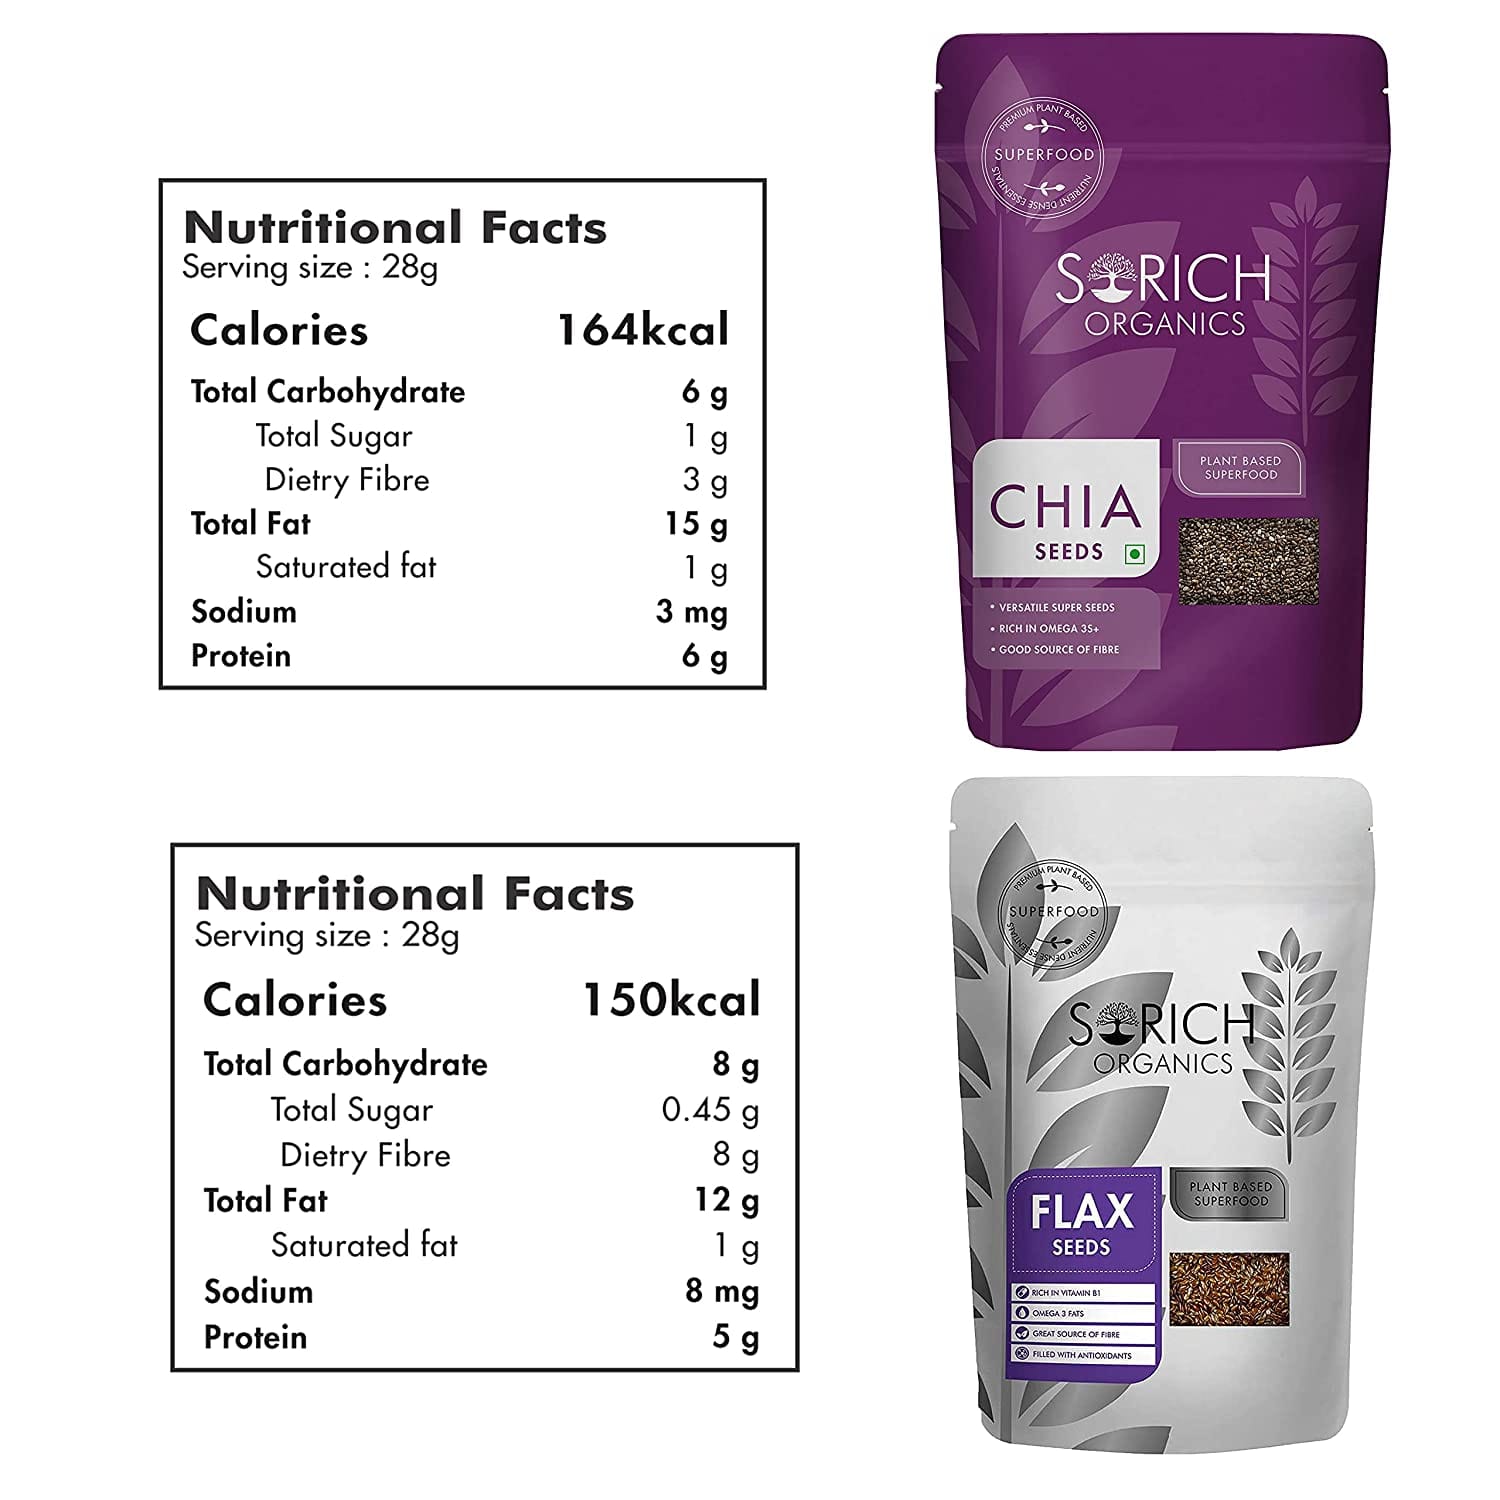 Chia 250 gm and Flax Seeds 200 gm - 450 gm - Sorich